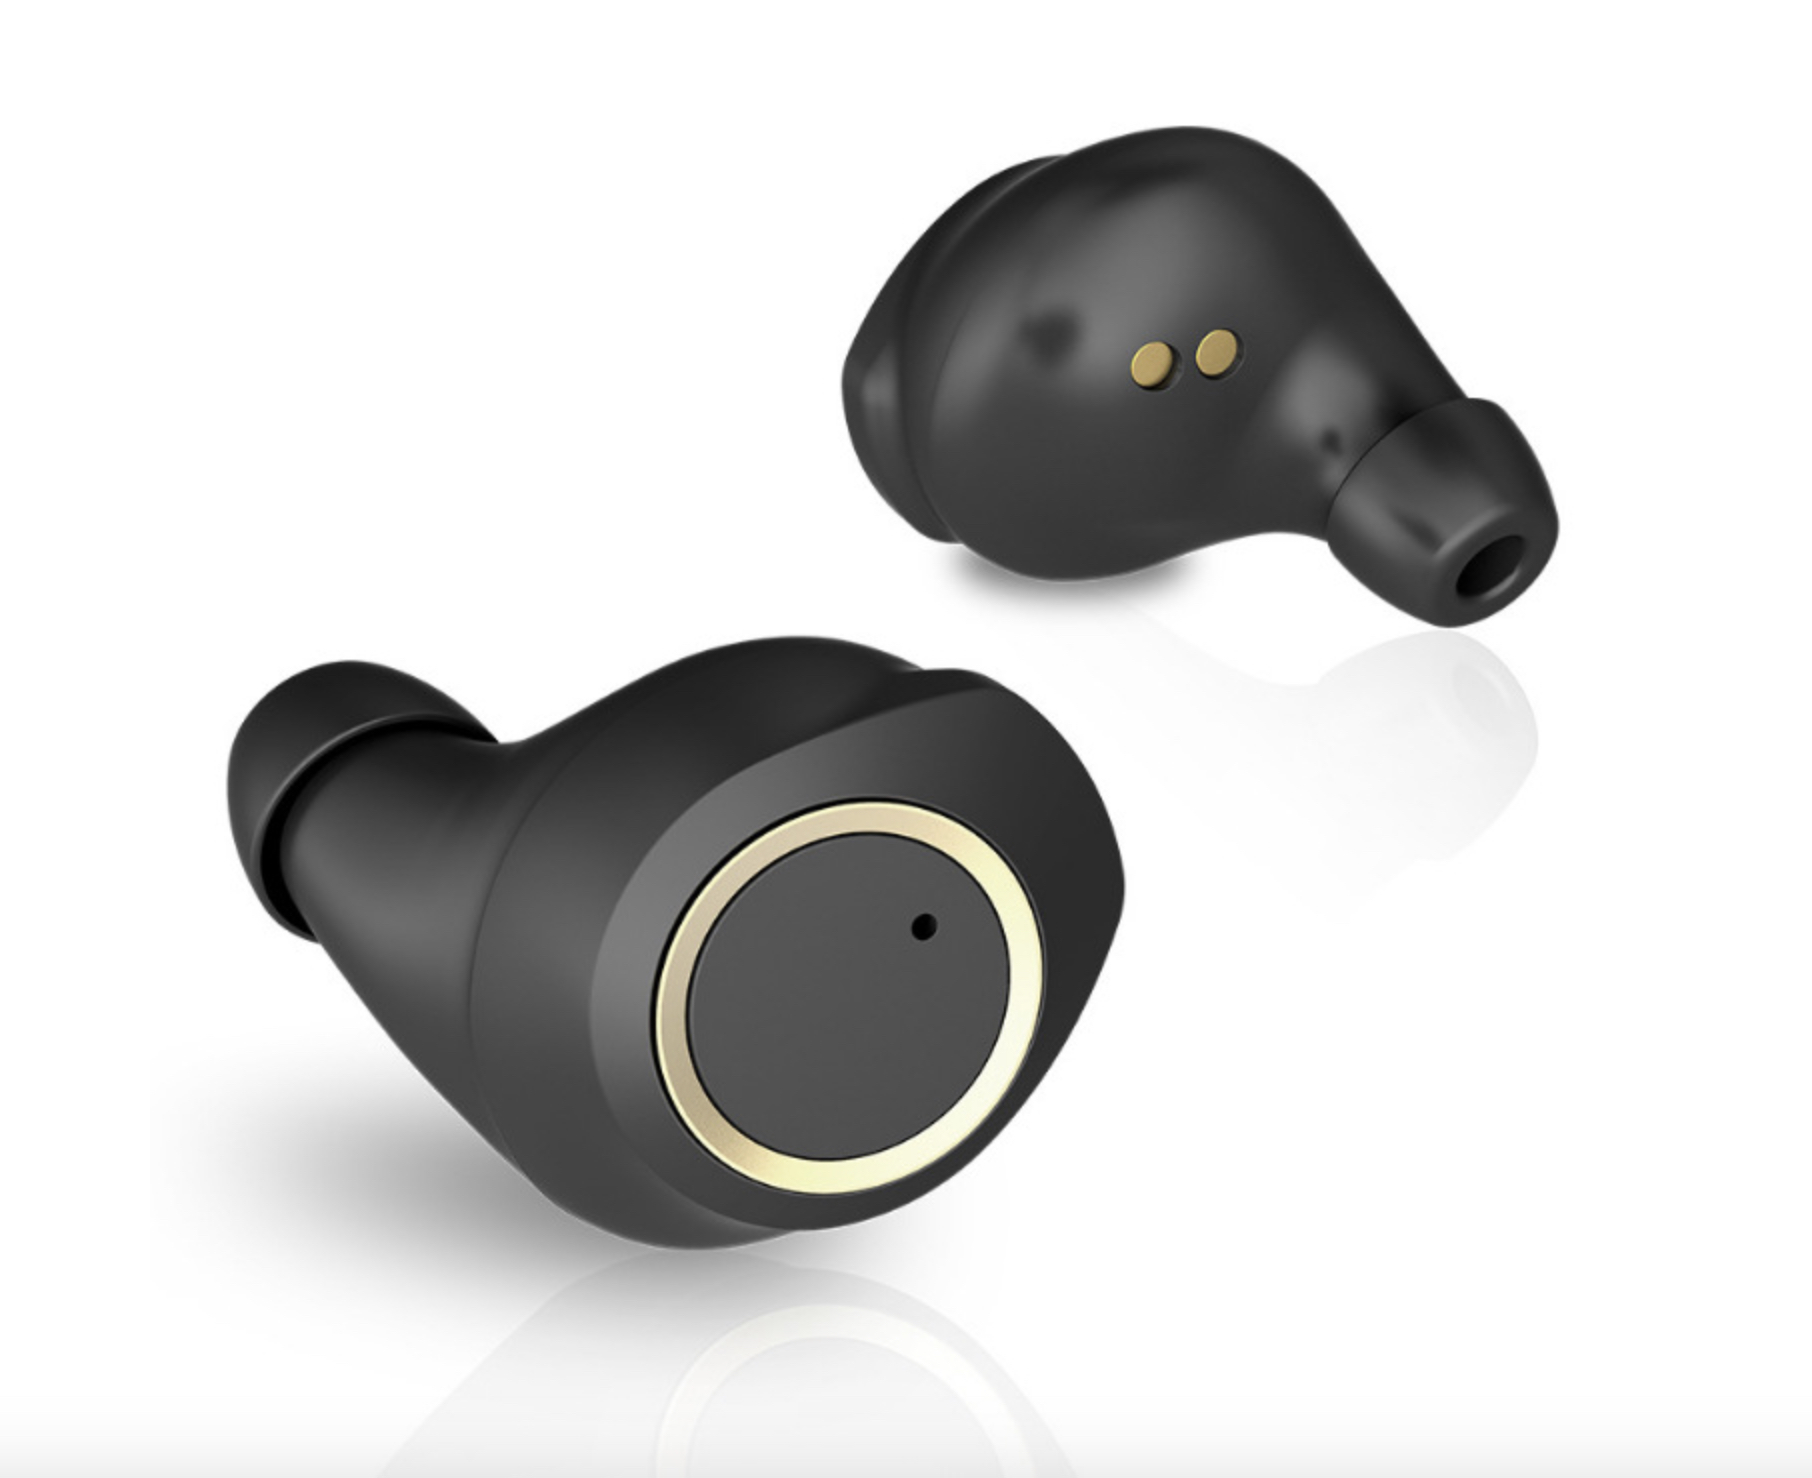 In-Ear Sport Wireless Earphones Detection Noise reduction Auto Paring Wireless Charging Case Earbuds Stereo Sound Bluetooth Headphone with mic